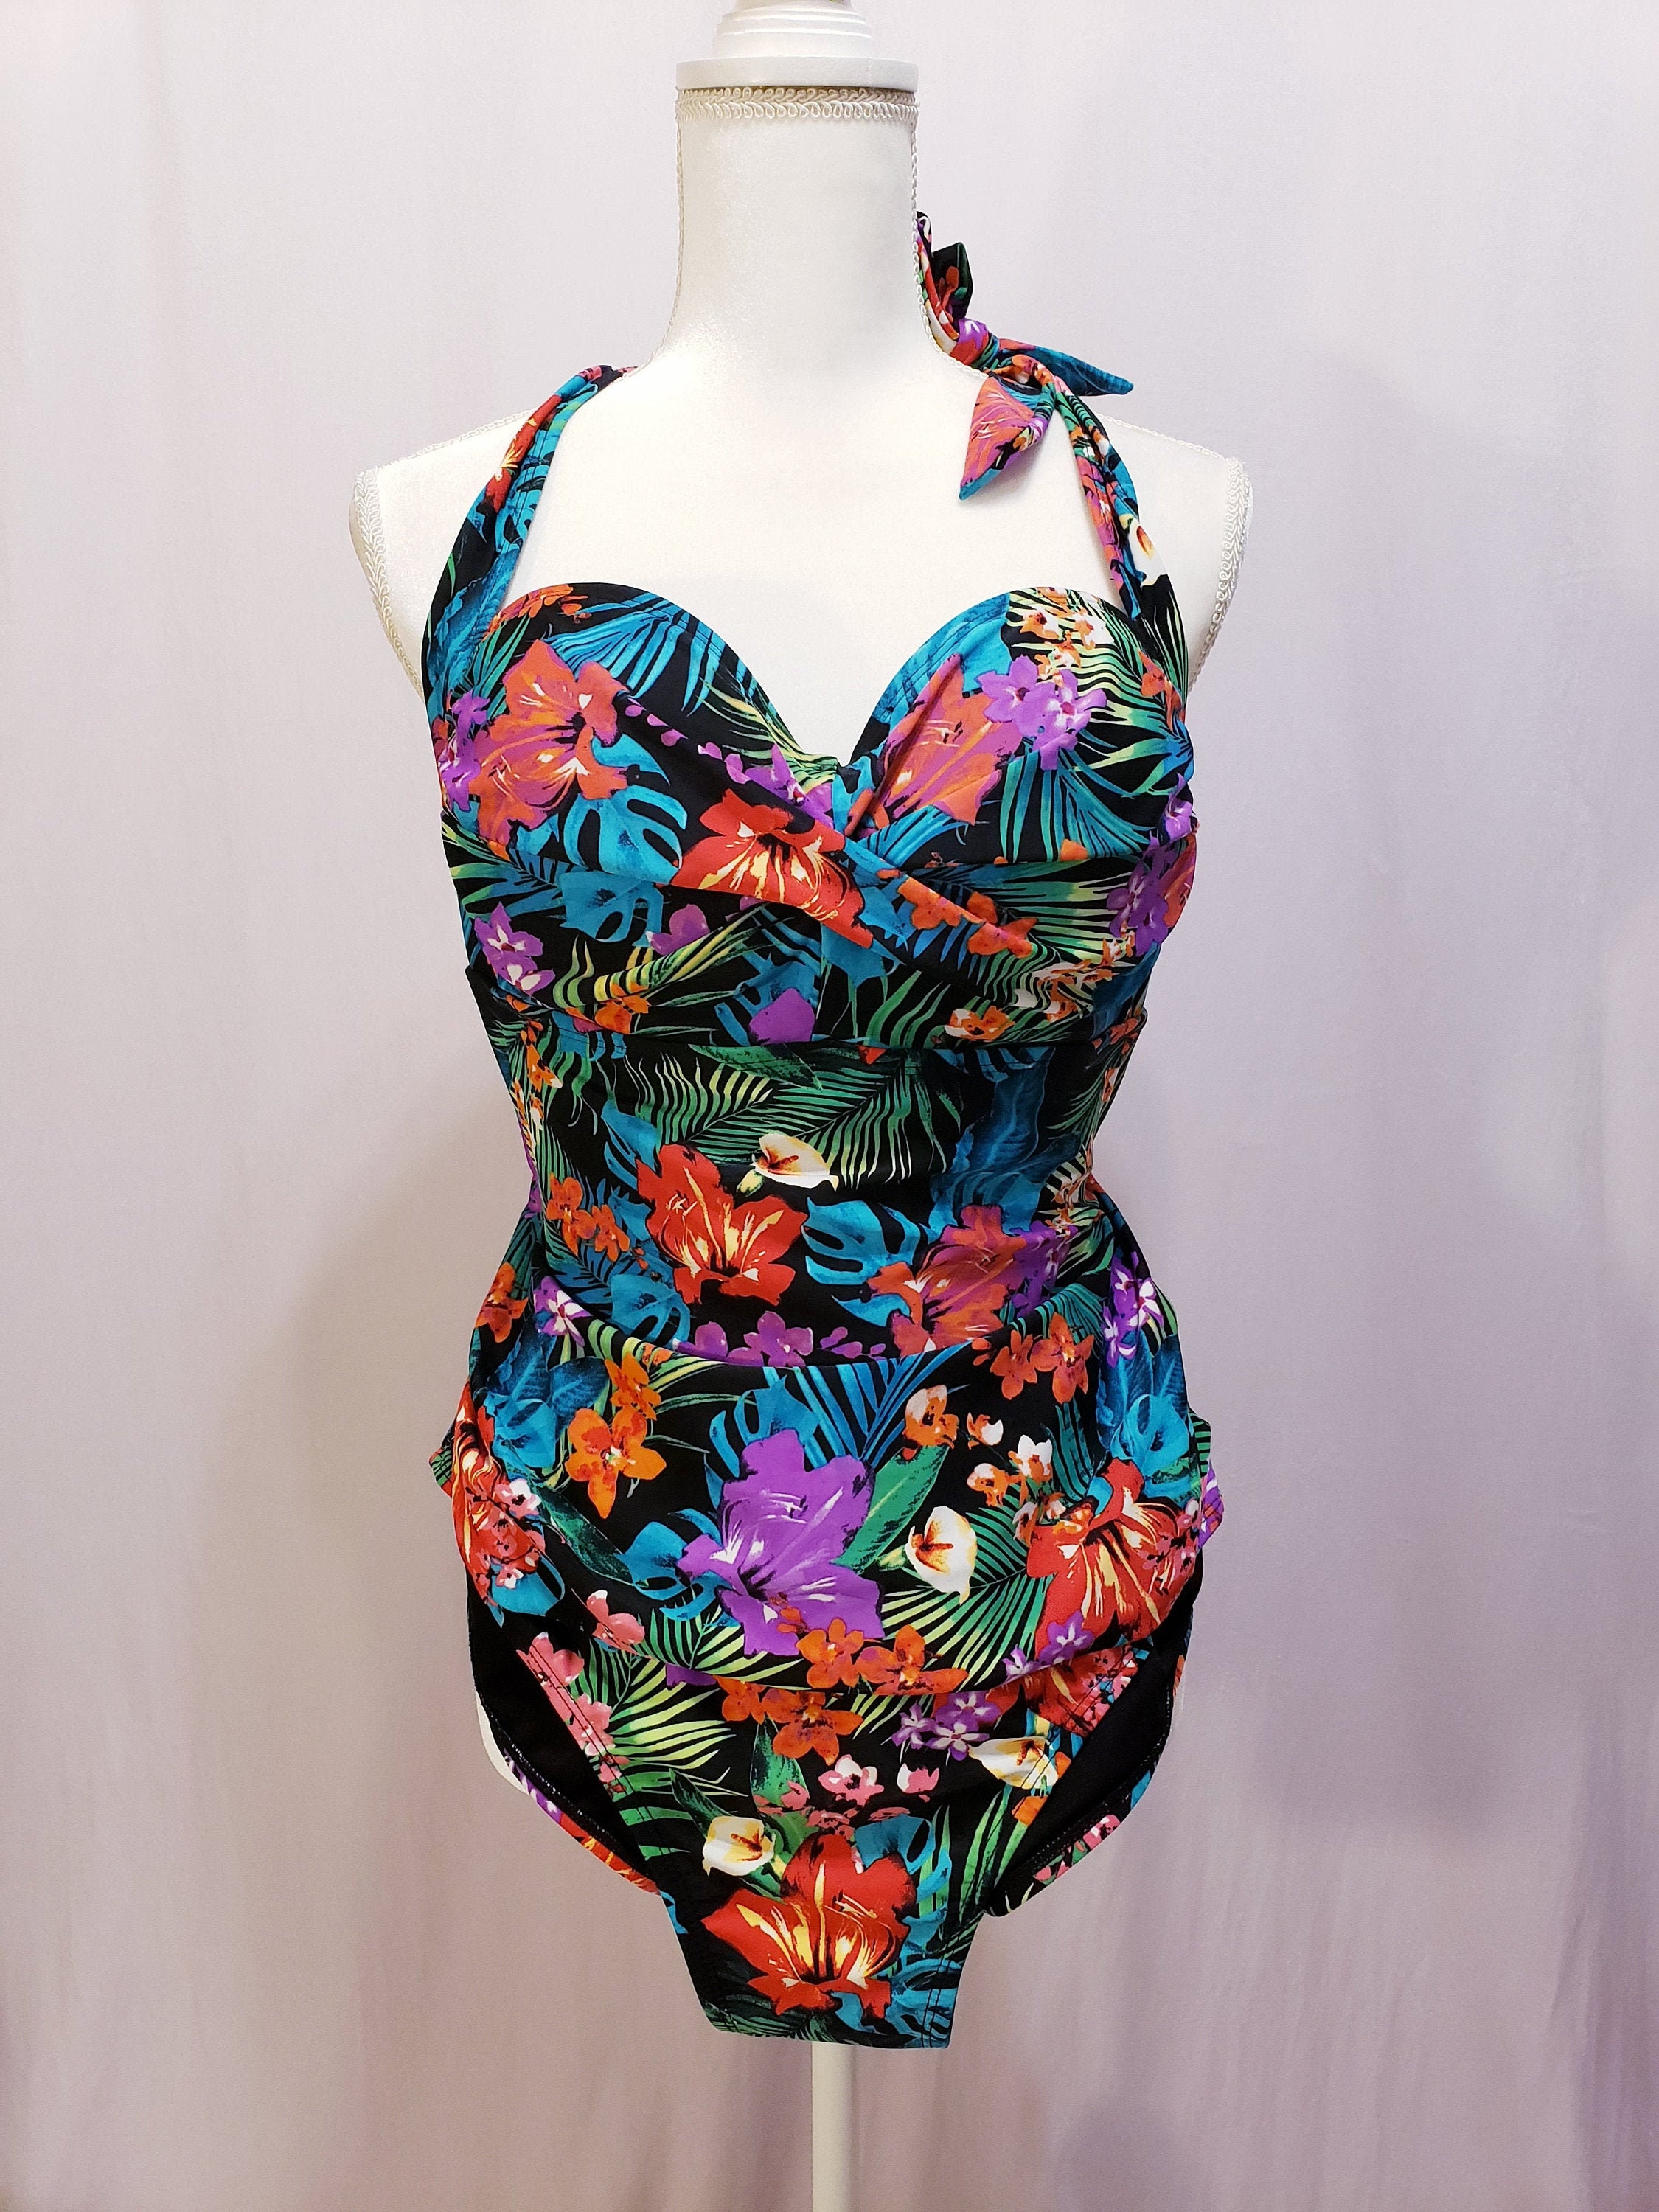 90s Floral Swimsuit - Etsy